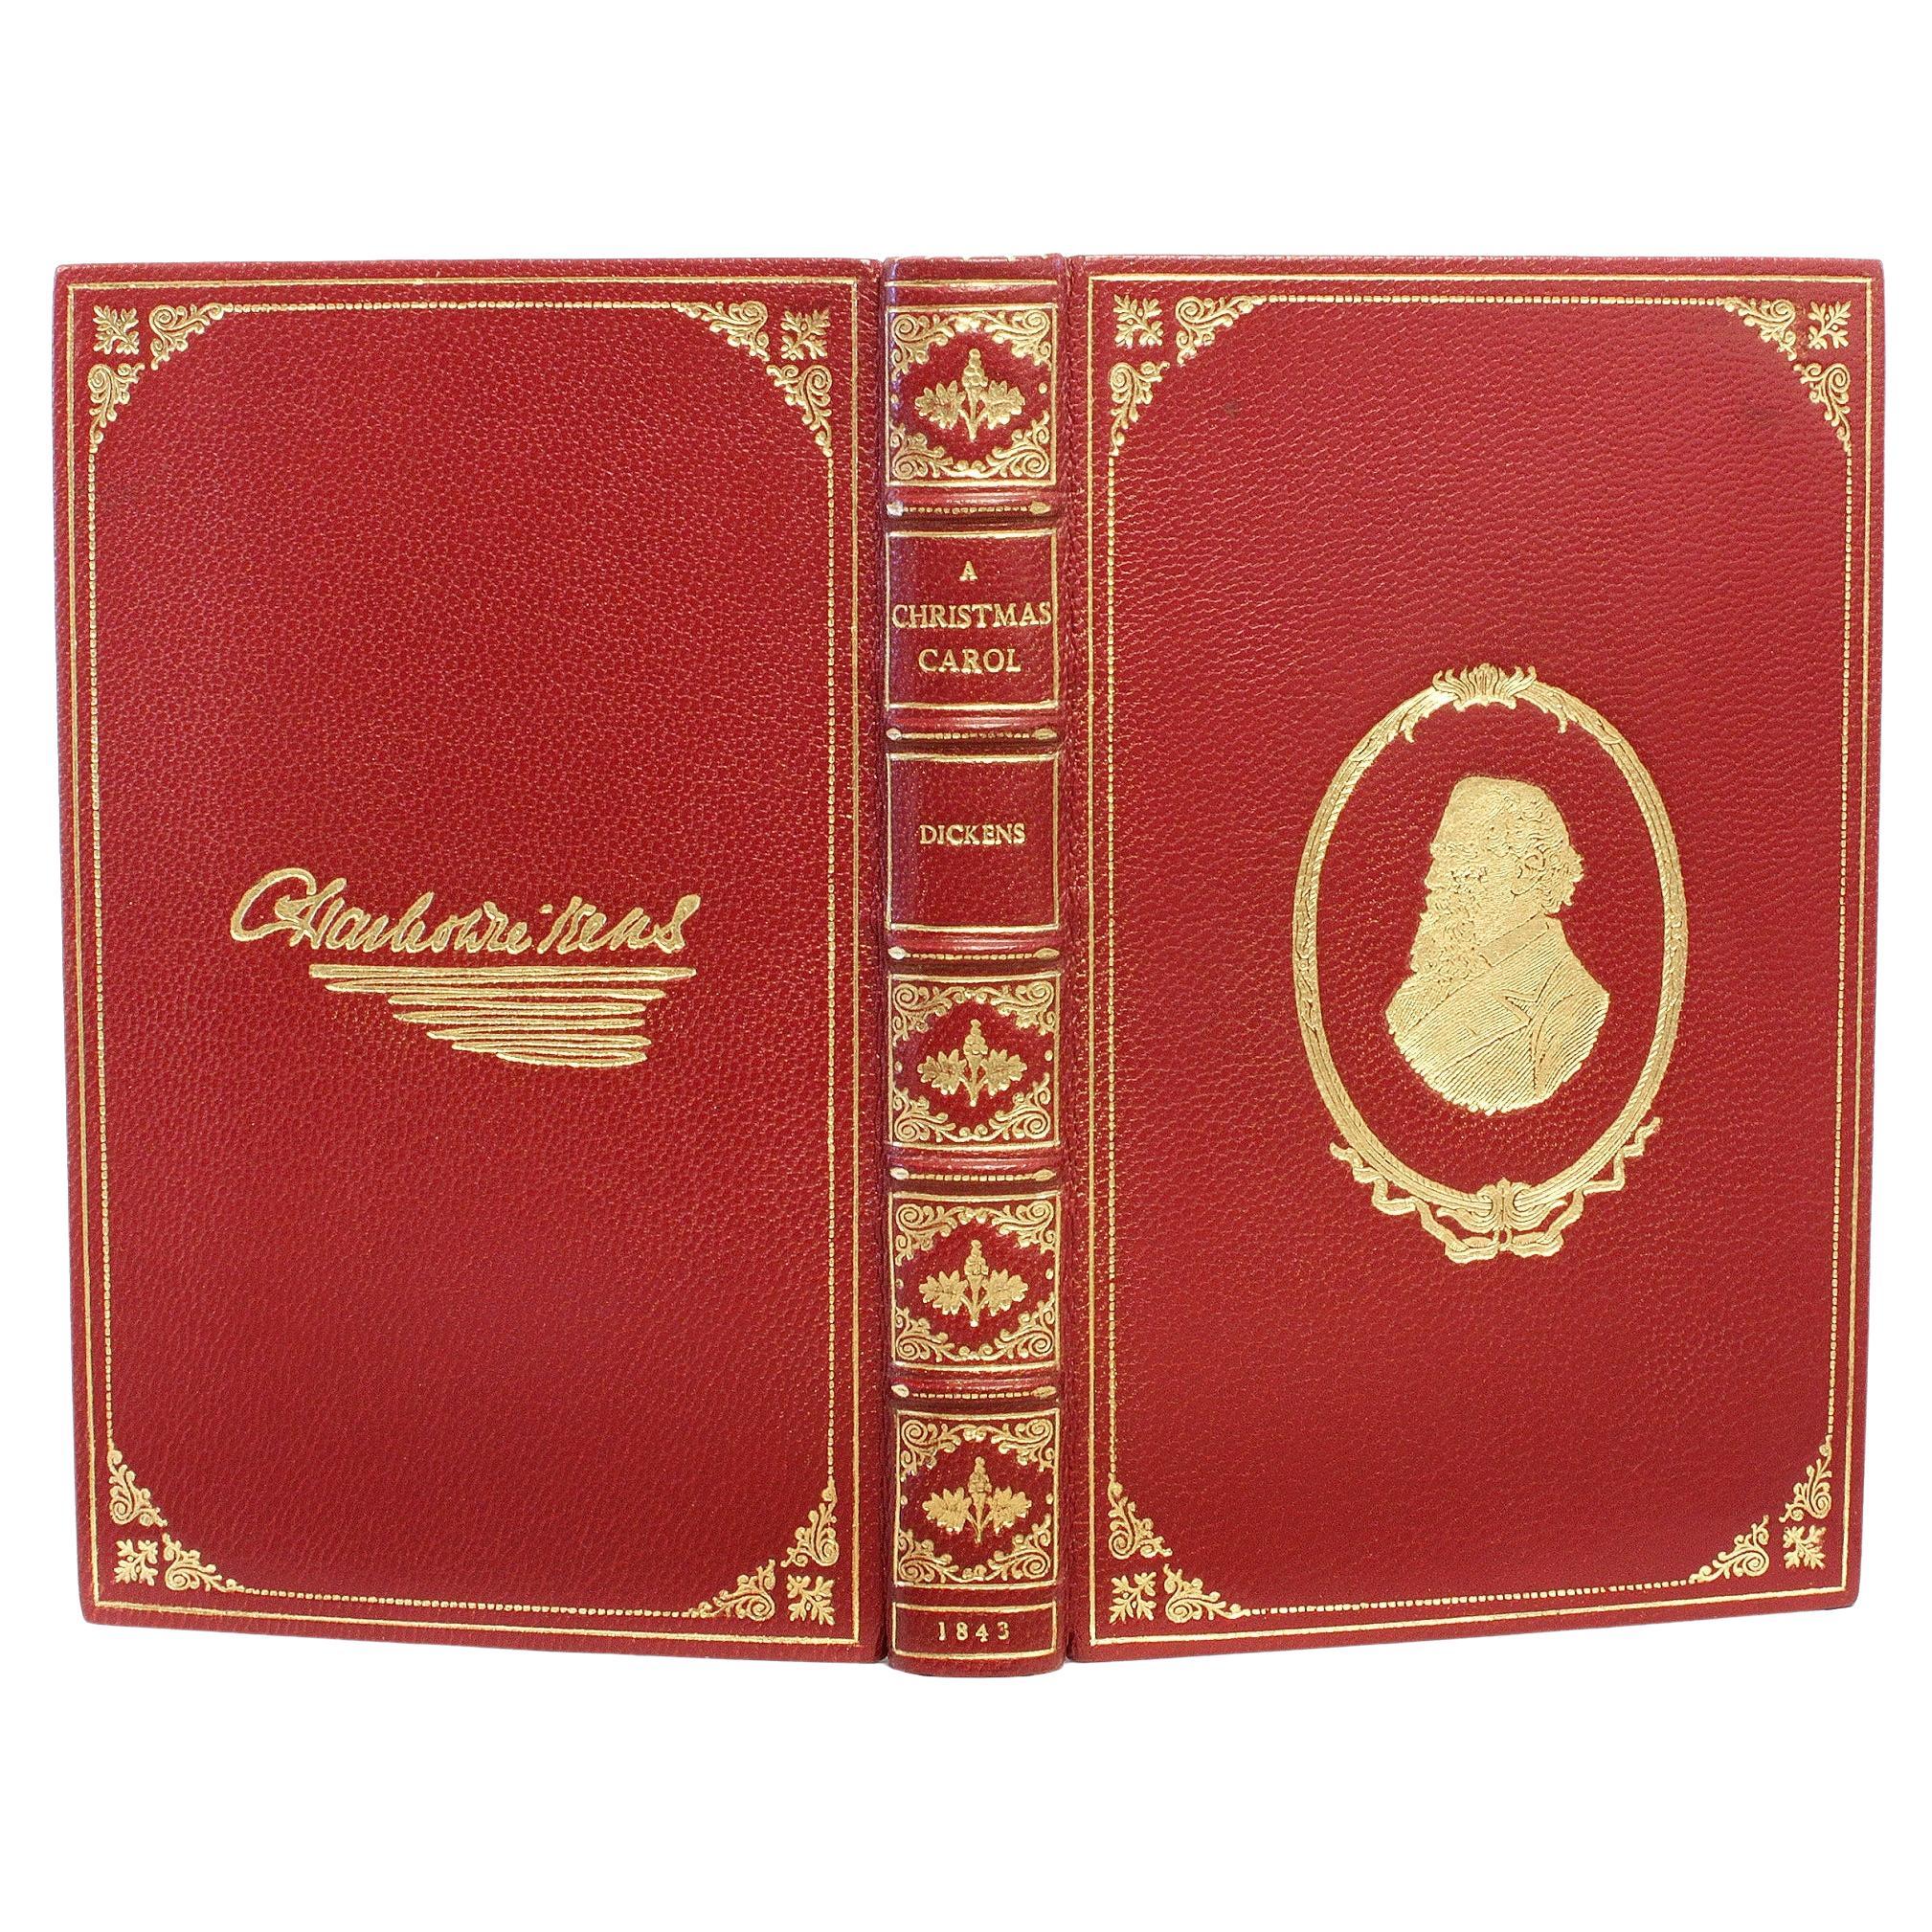 DICKENS. A Christmas Carol. 1843 - FIRST EDITION FIRST ISSUE - IN A FINE BINDING